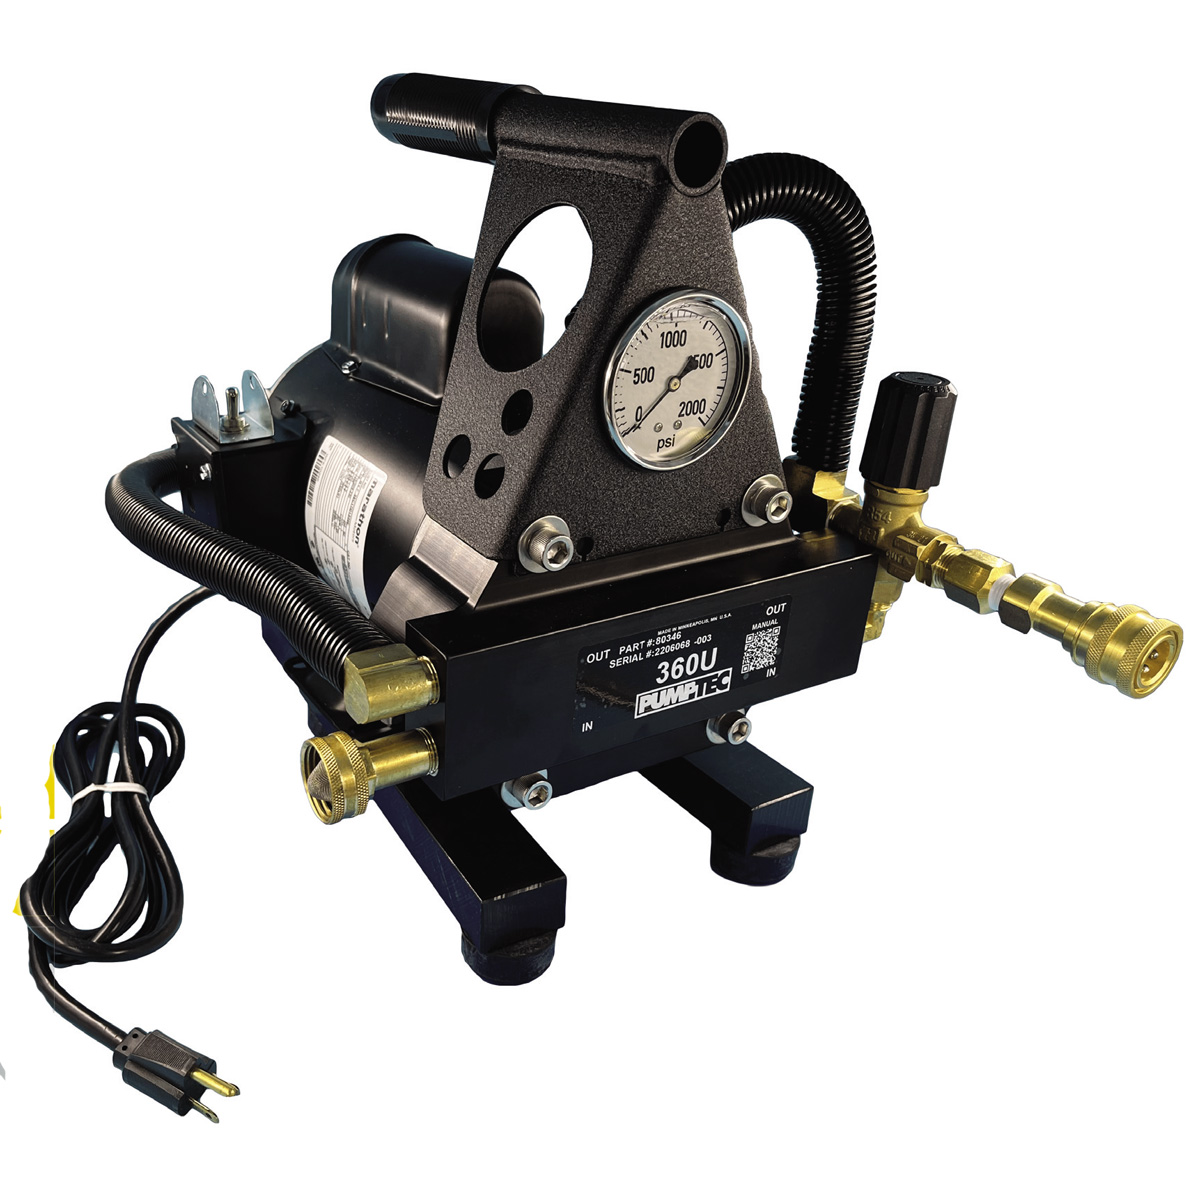 PumpTec 81887 Baby Otter 500 PSI Pump For Carpet Cleaning And Upholstery Cleaning Adjustable Pressure